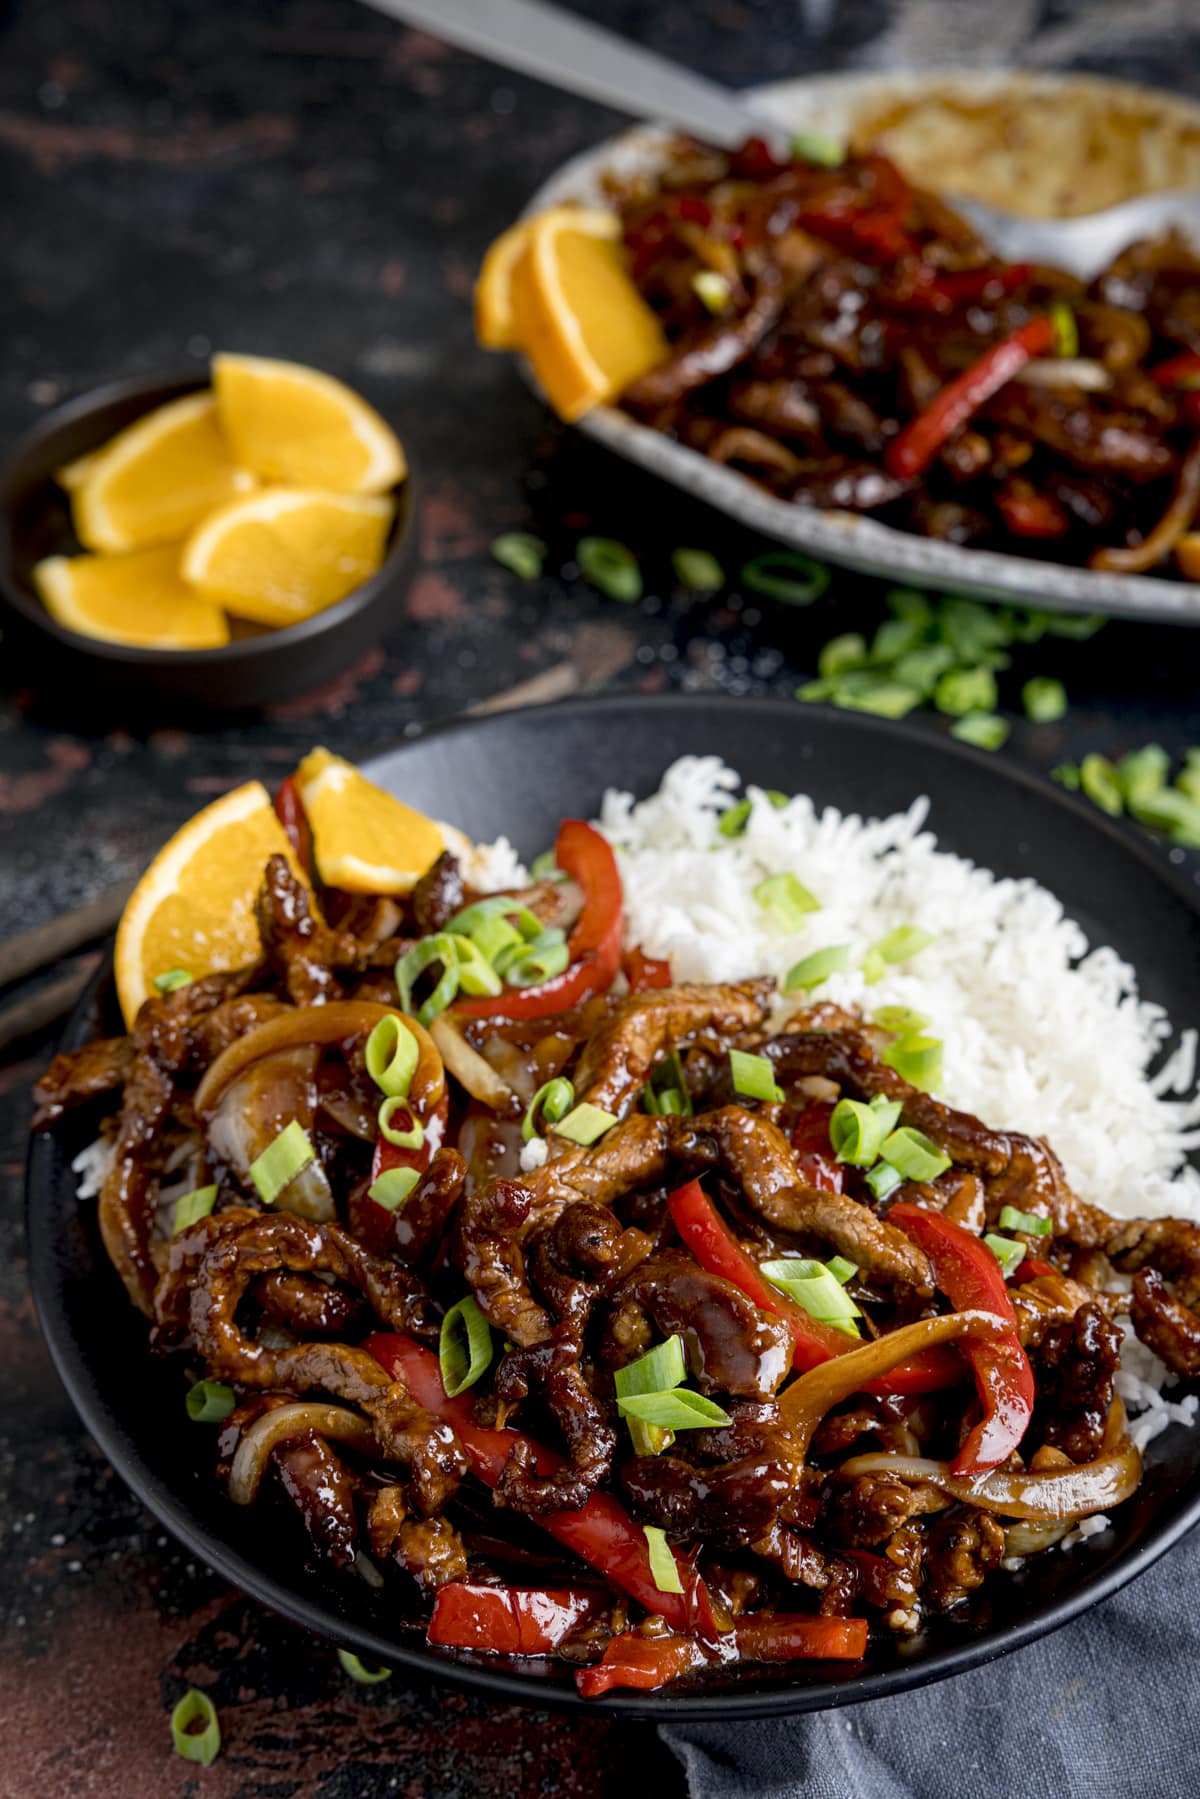 Crispy orange beef with peppers and onions on a dark plate with boiled rice.  Orange slices and spring onions are scattered, and the serving platter can be seen in the background.